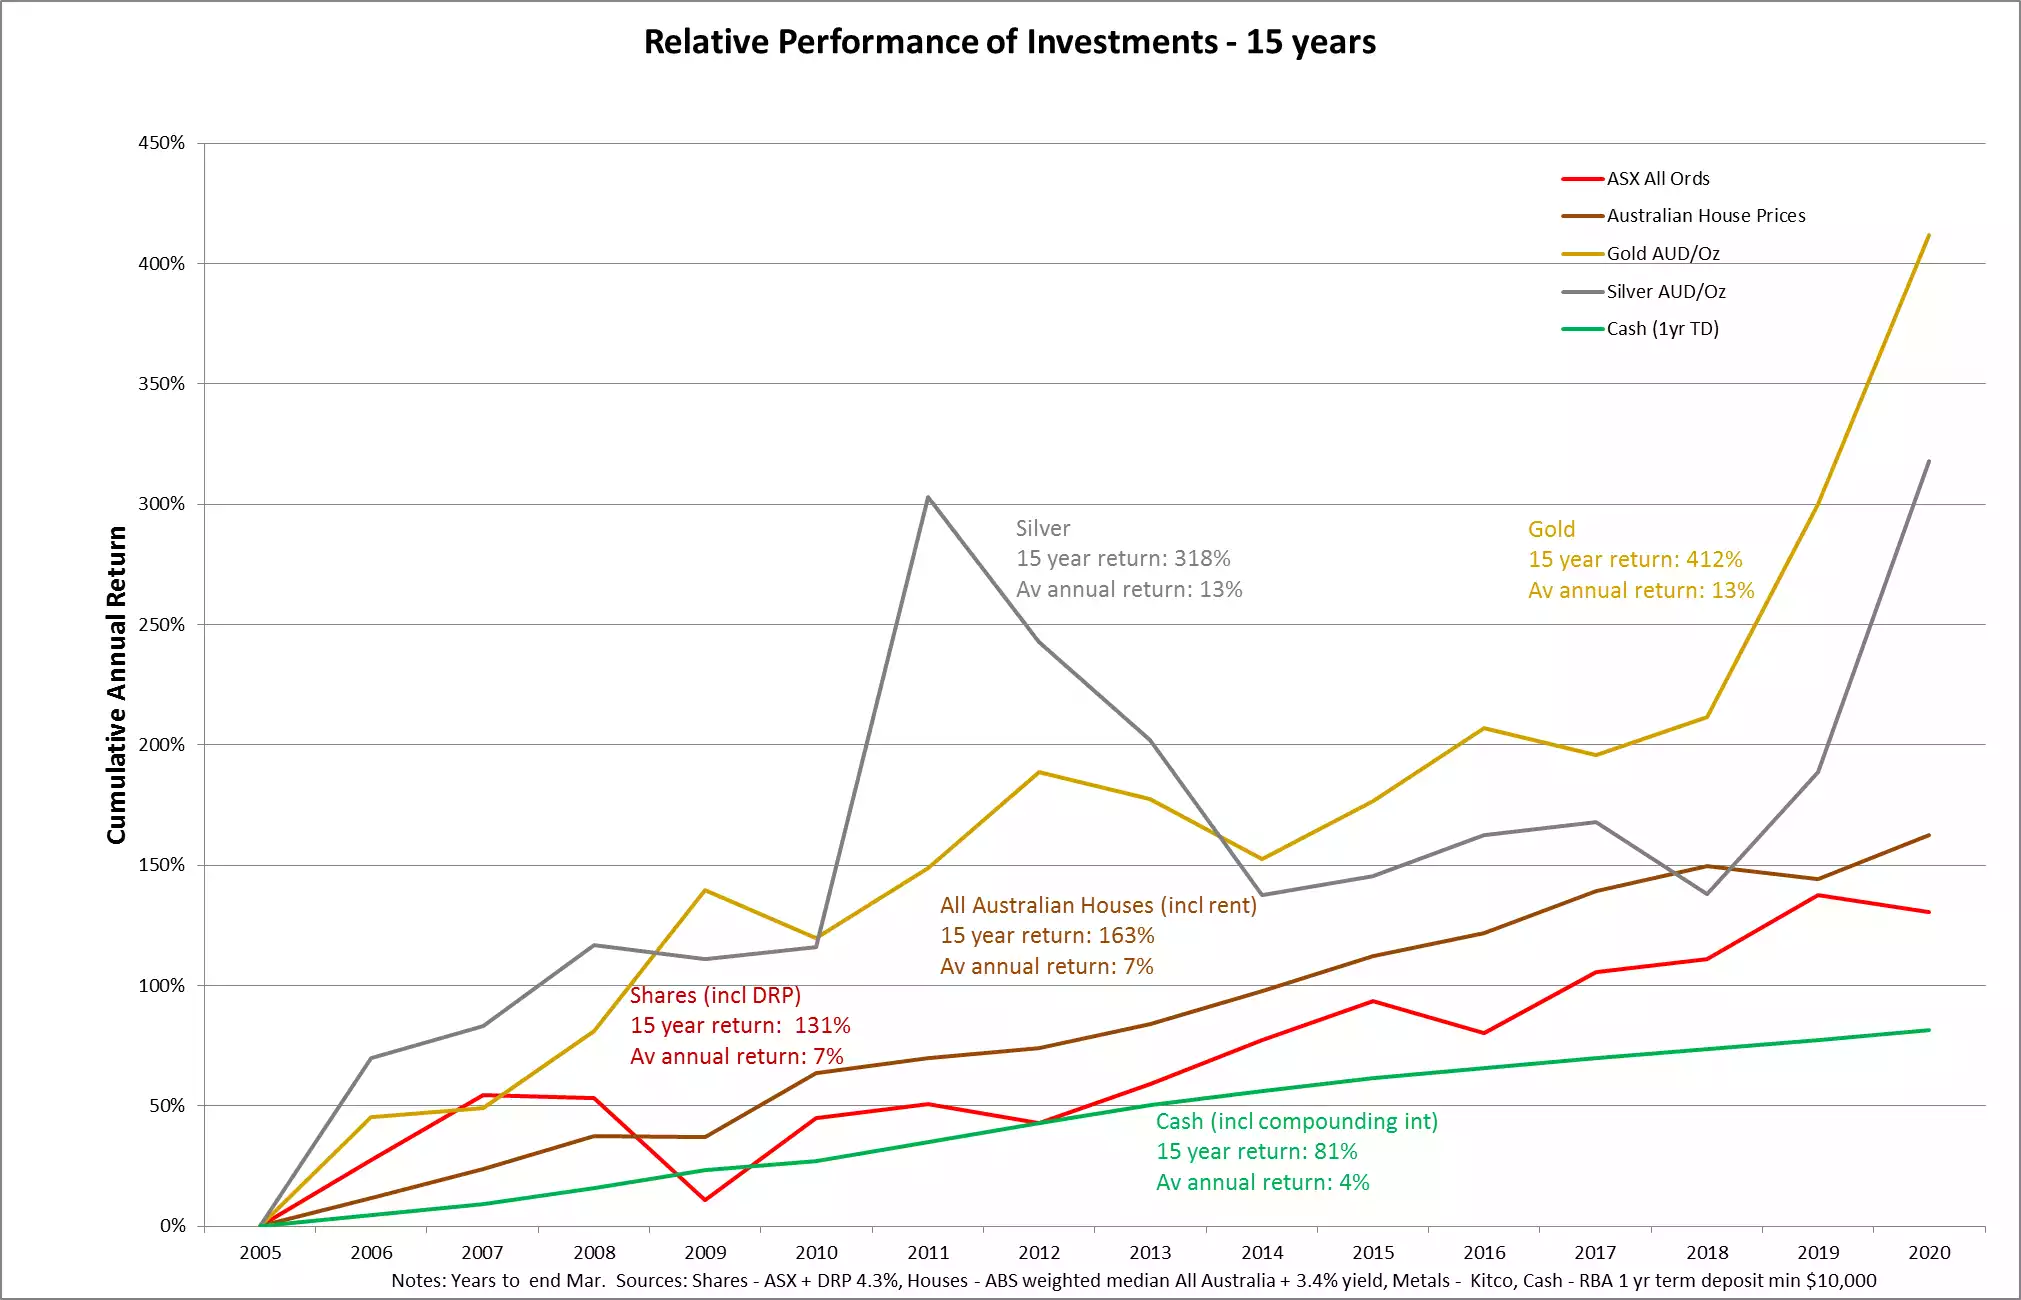 Relative performance of investments - 15 years